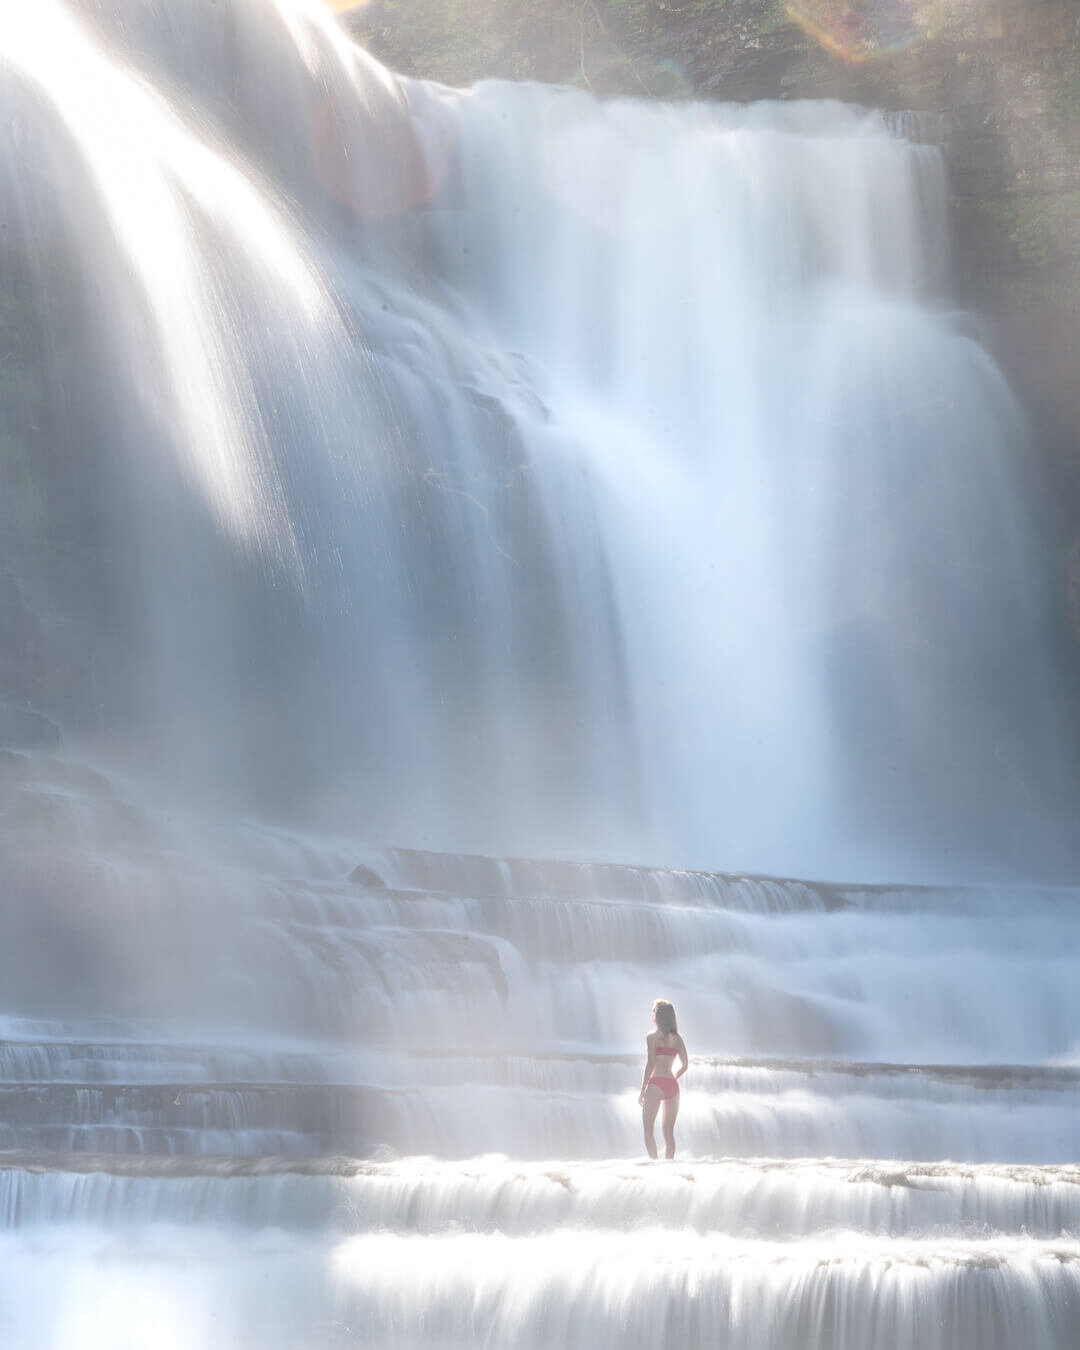 Cooling down in the water at Cummins Falls in Tennessee’s Highland Rim.